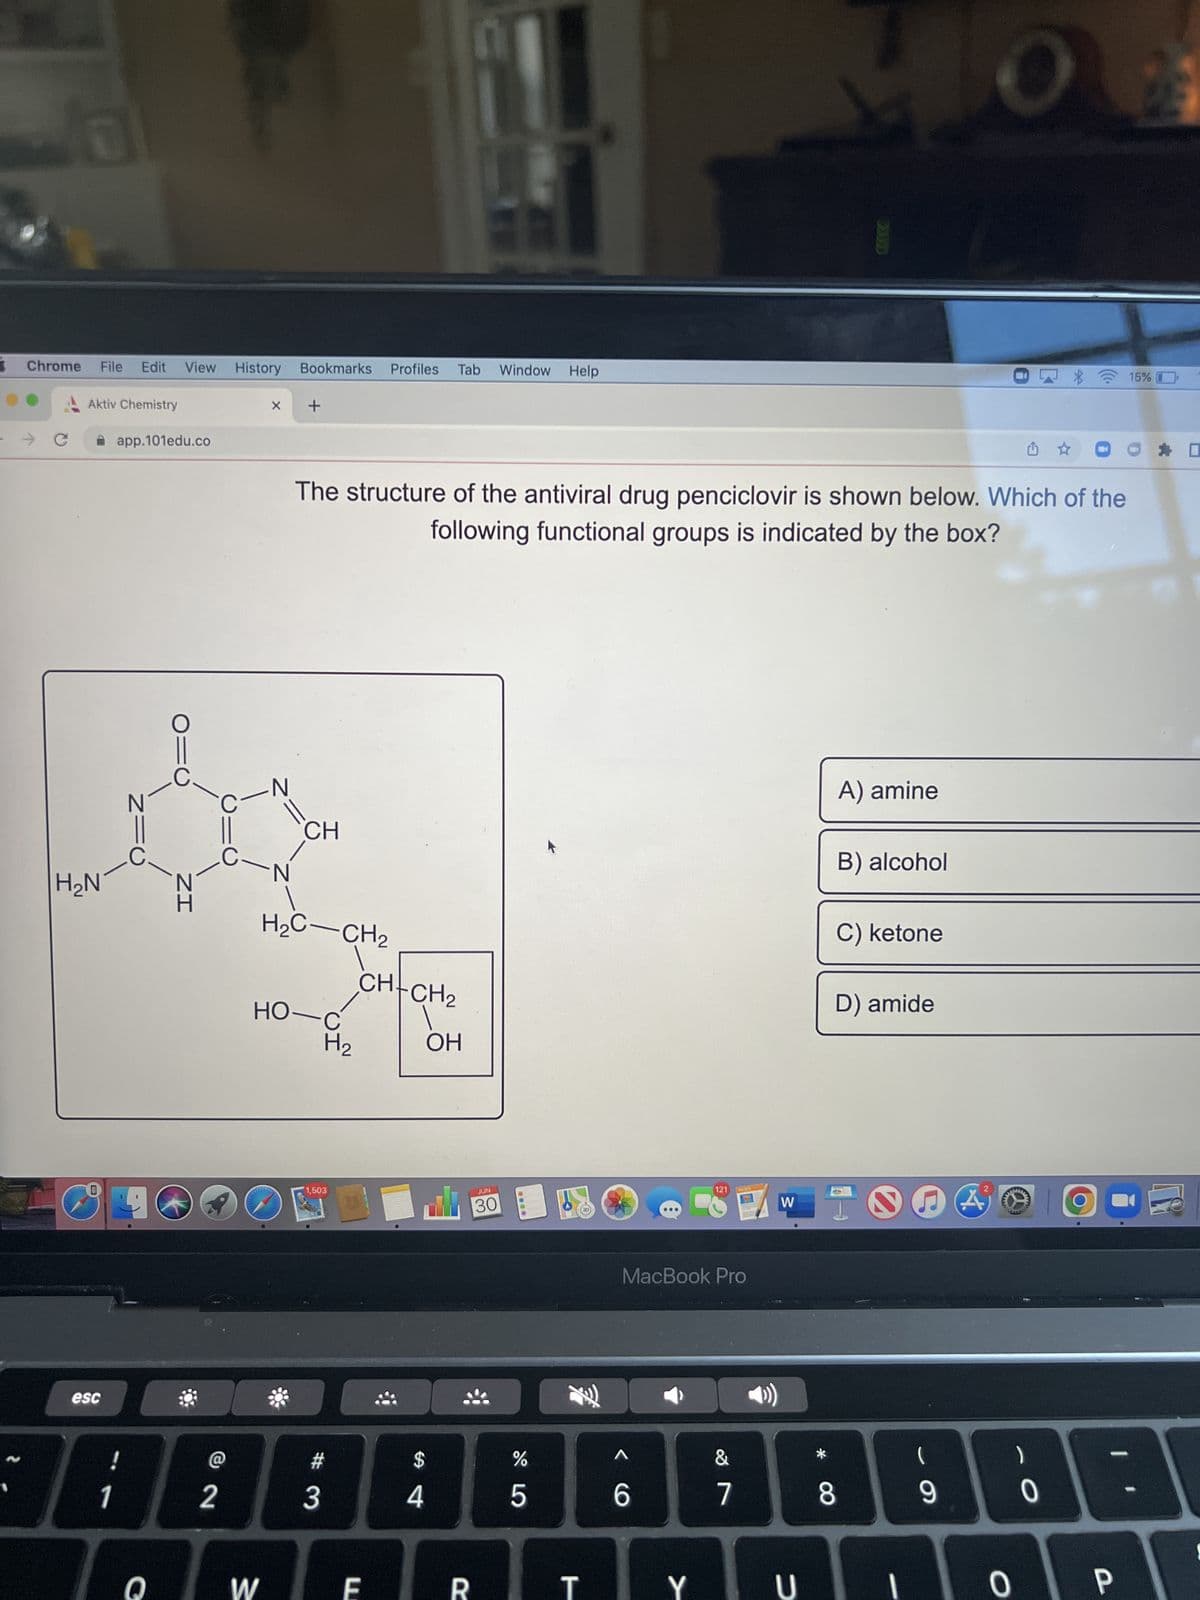 N
Chrome
→ C
Ol
H₂N
MARK
File Edit View History
Aktiv Chemistry
esc
app.101edu.co
-C
!
1
NIC
Q
IZ
@
2
C-N
C-
X
WYKW
W
N
Bookmarks Profiles Tab Window Help
+
CH
H₂C-CH₂
HO-C
H₂
The structure of the antiviral drug penciclovir is shown below. Which of the
following functional groups is indicated by the box?
1,503
#3
CH-CH₂
E
$
4
ОН
R
JUN
30
do 5
%
MacBook Pro
A
6
121
Y
&
7
W
U
A) amine
B) alcohol
C) ketone
D) amide
8
(
O 25
9
www
ú
0
0
O
15%
P
D
-
B